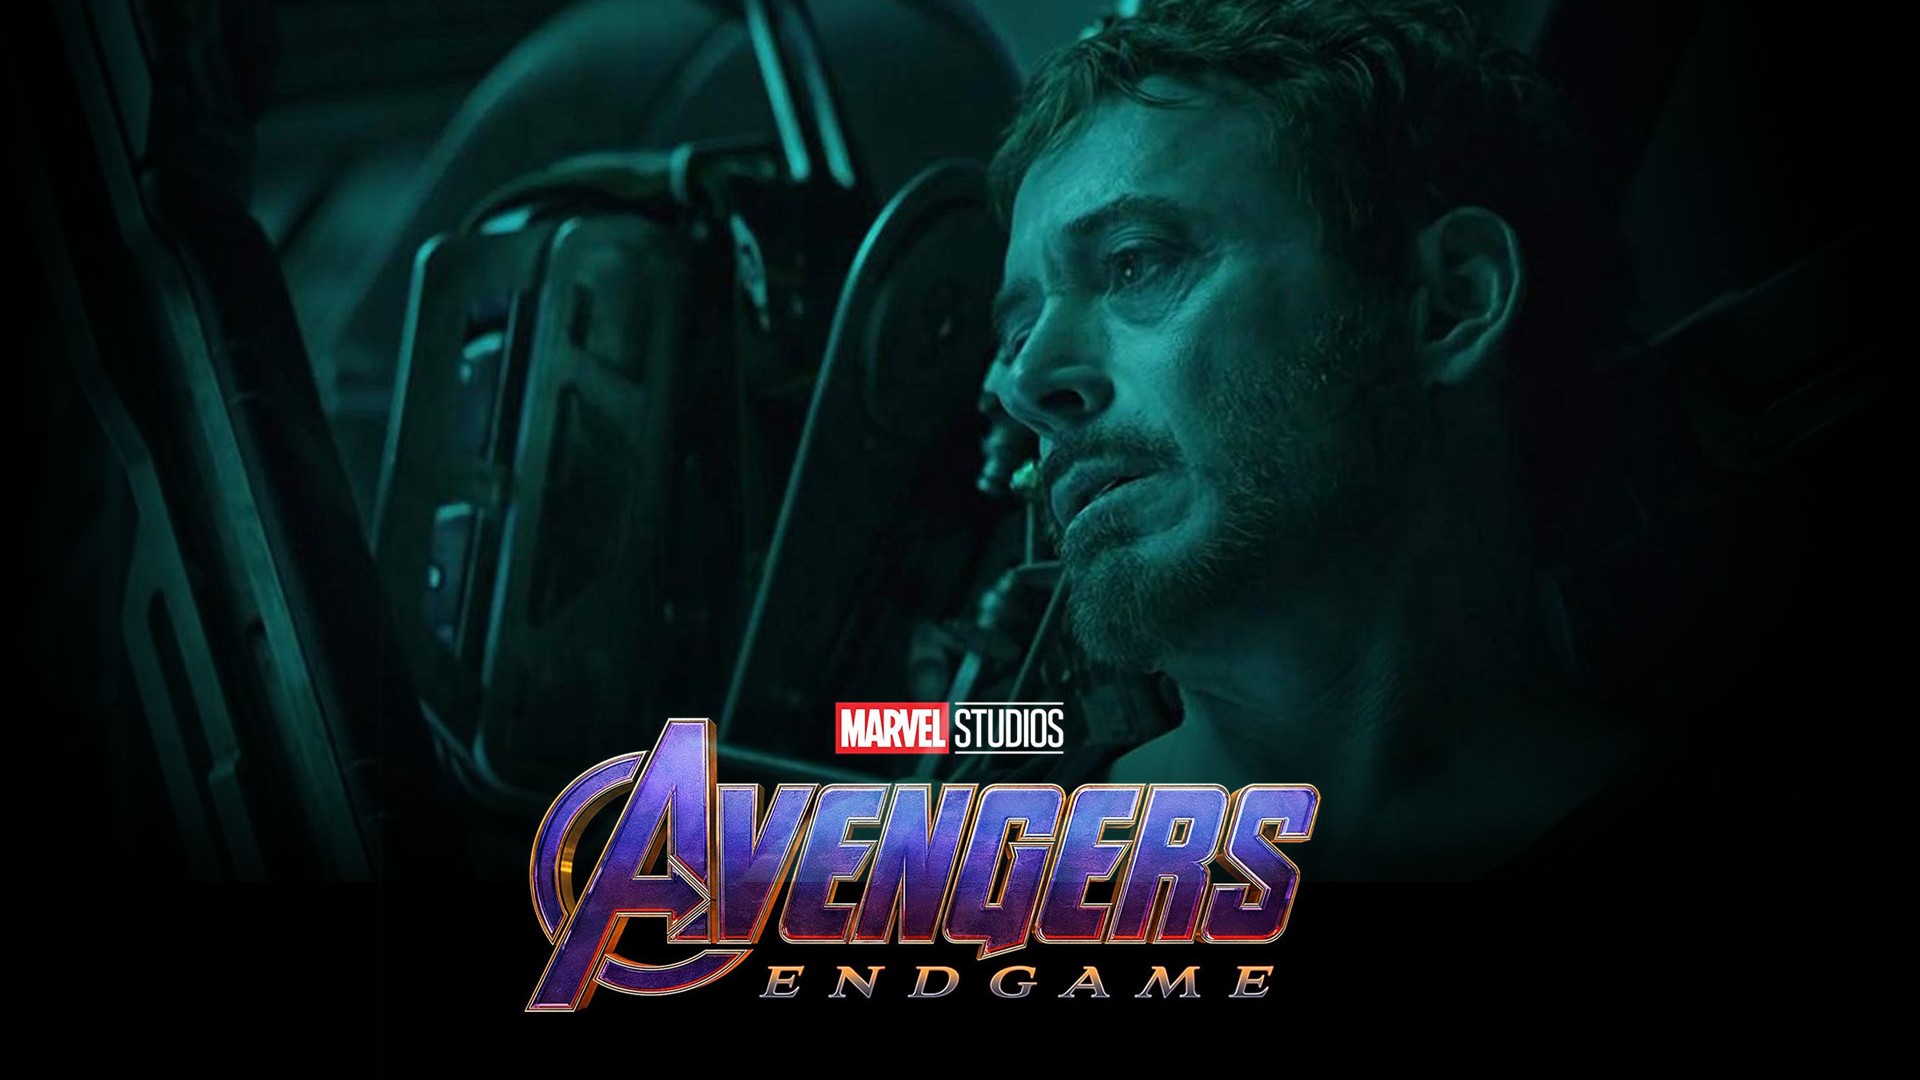 Avengers Endgame 2019 Wallpaper with high-resolution 1920x1080 pixel. You can use this poster wallpaper for your Desktop Computers, Mac Screensavers, Windows Backgrounds, iPhone Wallpapers, Tablet or Android Lock screen and another Mobile device